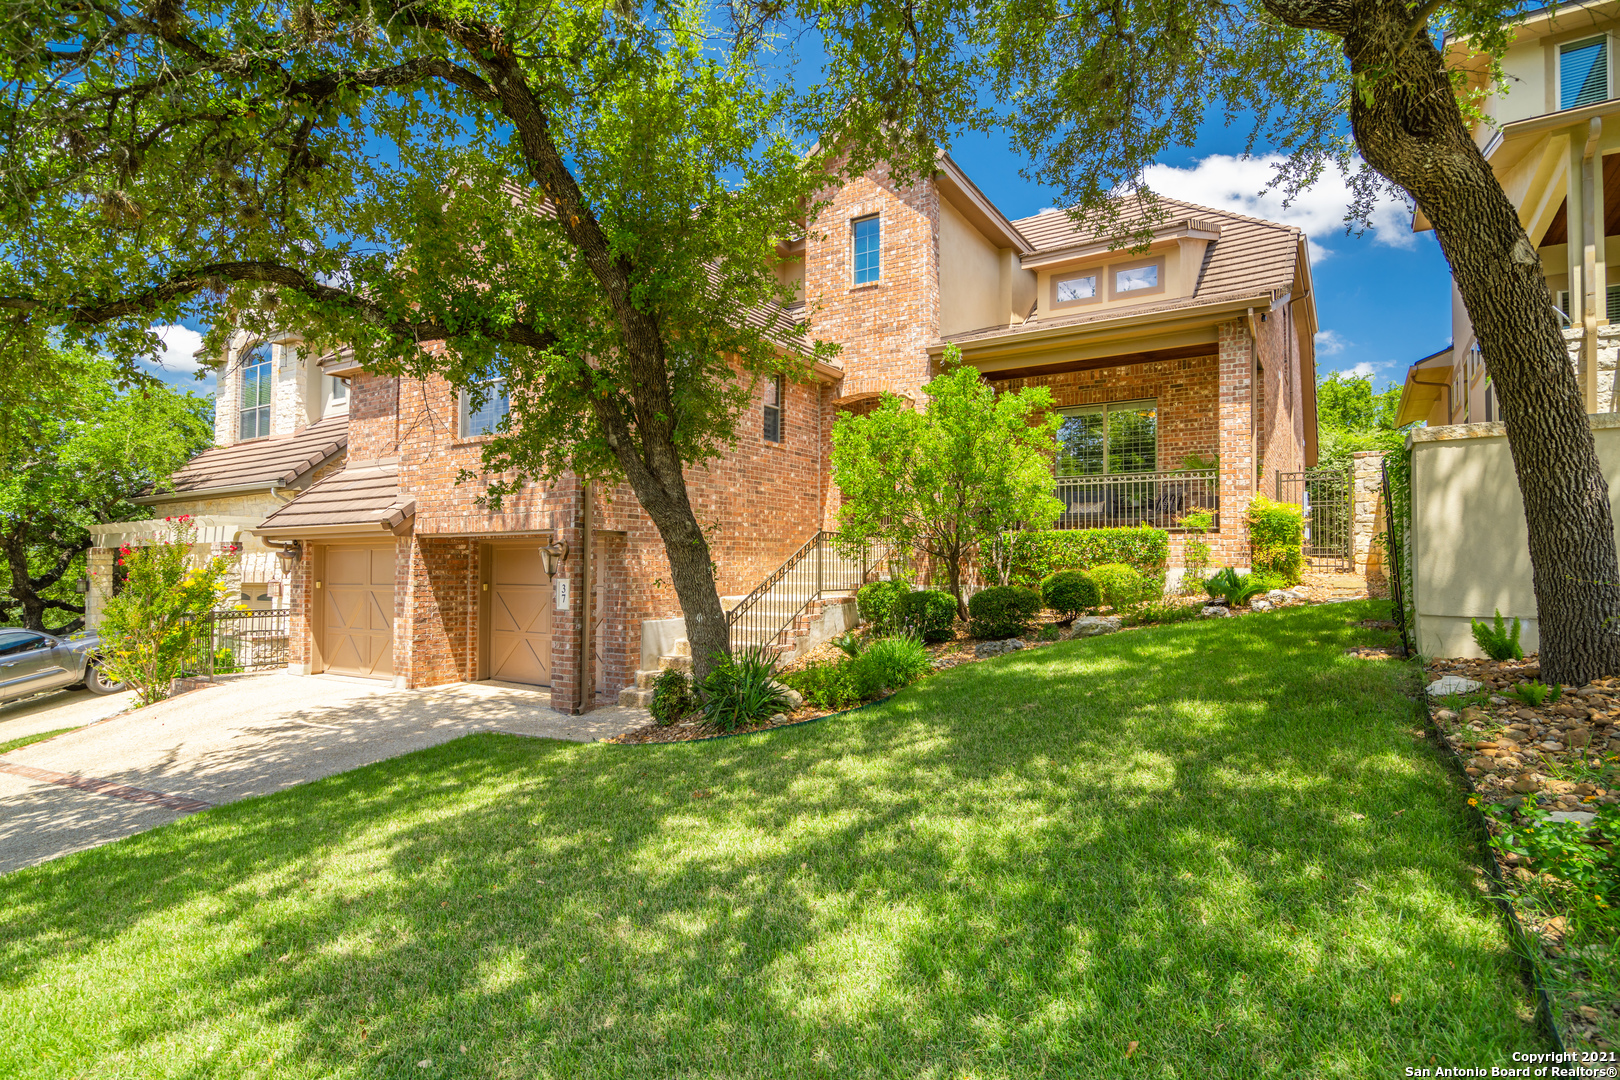 Located in San Antonio's premier guard-gated Dominion neighborhood, this meticulously maintained home on a greenbelt lot provides a seamless layout ideal for a lifestyle of comfort and convenience. Perfect for entertaining and raising a family alike, this home features oversized bedrooms, a gourmet kitchen with gas cooking, and multiple living areas, including a large game/flex room with a dedicated 1/2 bath. Enjoy a cup of coffee or unwind with a glass of wine on the front or back patio and enjoy the serene greenbelt views.  The original owners have demonstrated wonderful pride of ownership in maintaining this home - still looks brand new! The game room and large walk-out attic could easily be converted into additional bedrooms. Brand new AC upstairs.